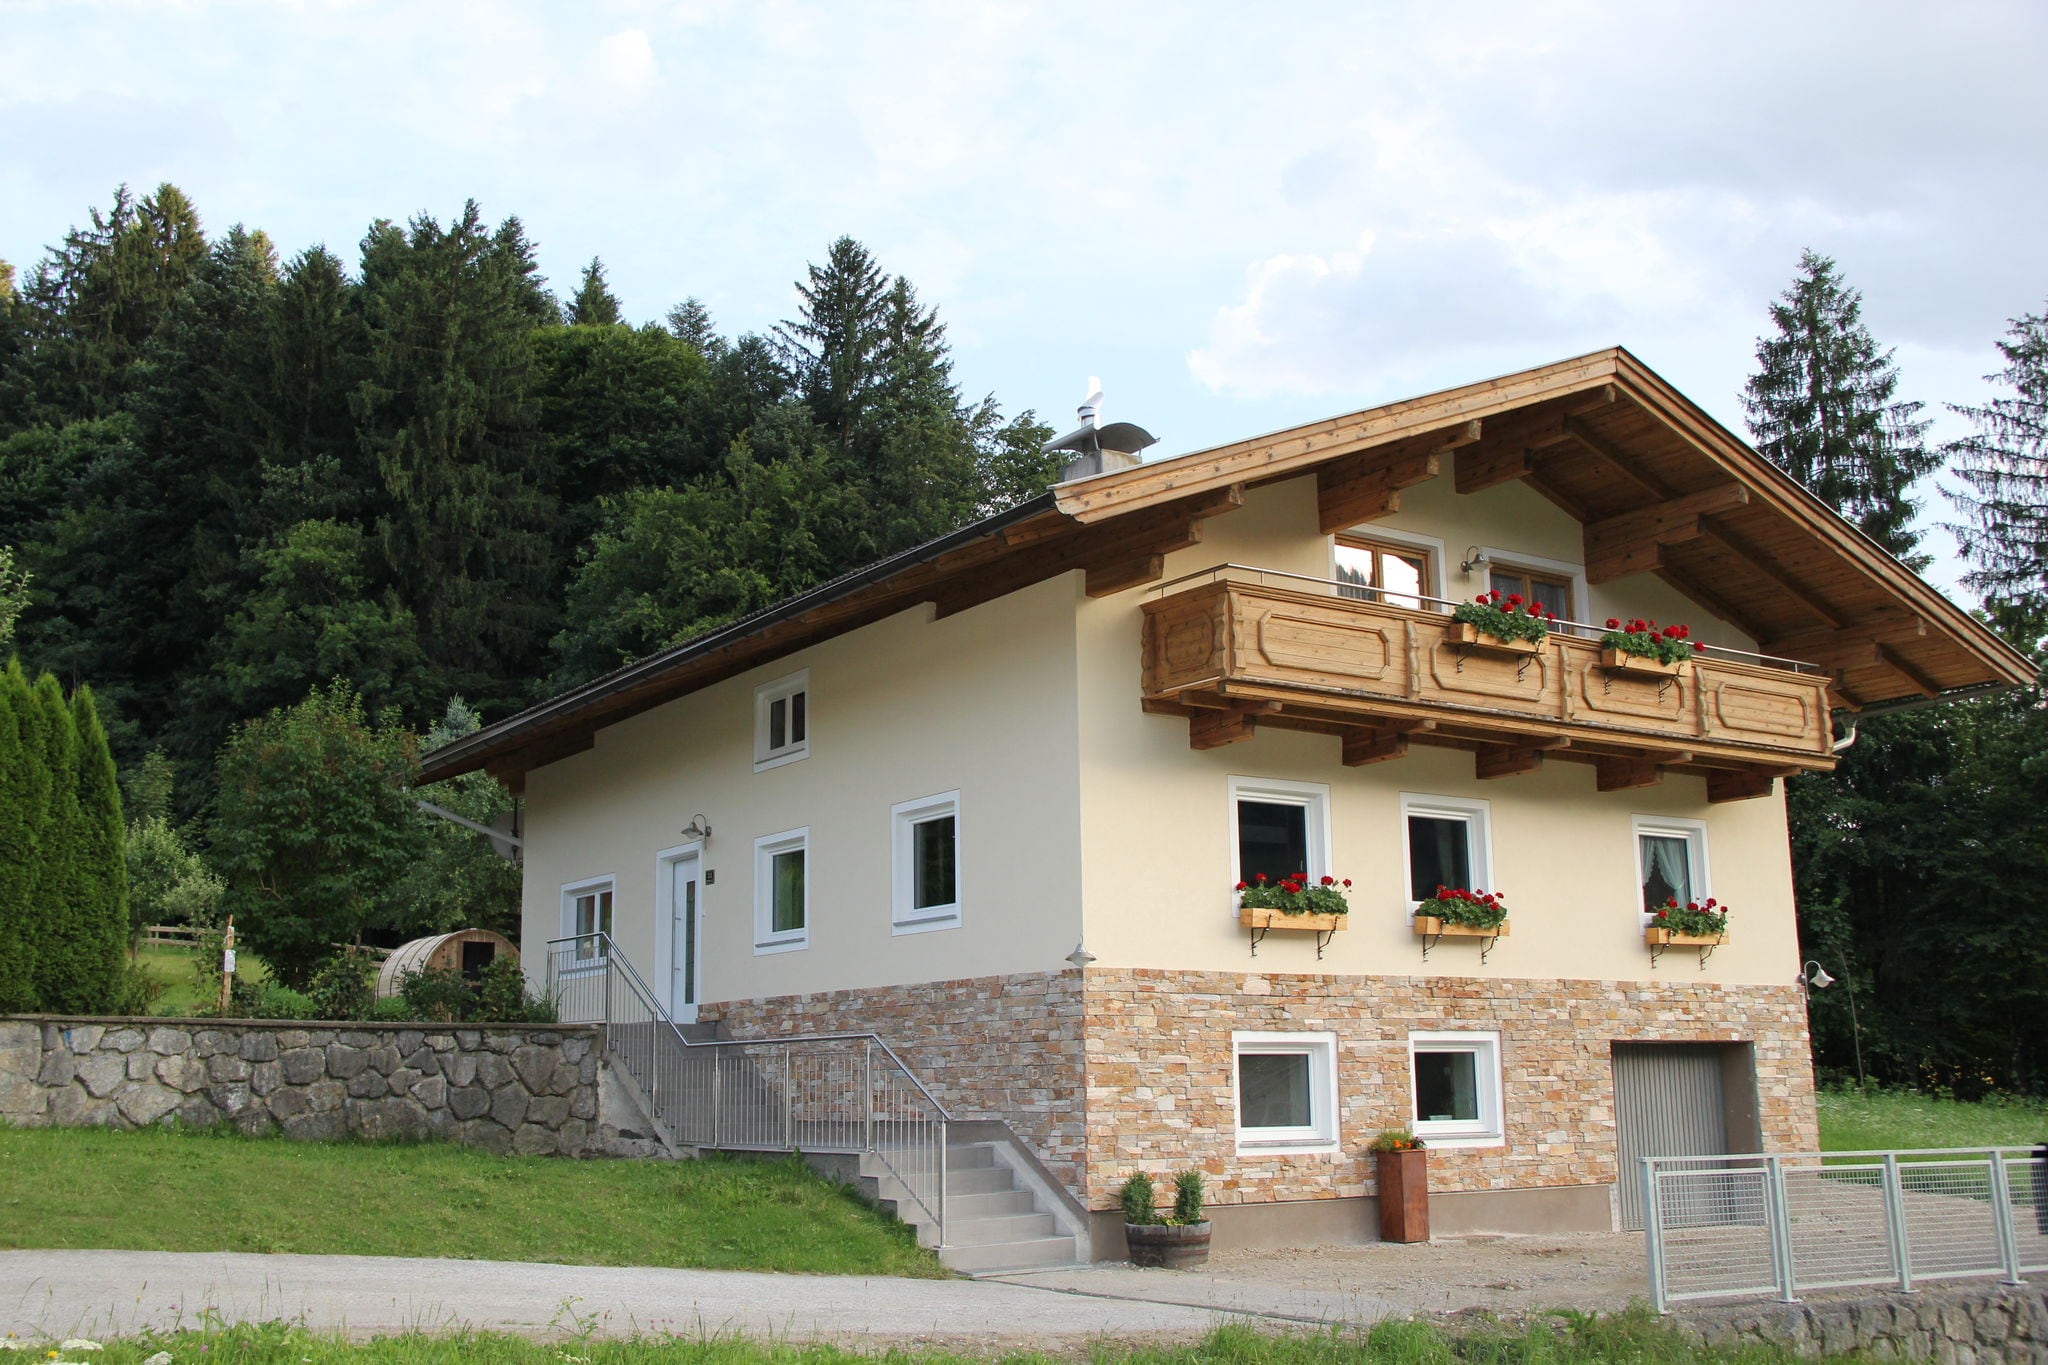 Spacious Chalet near Ski area in Itter